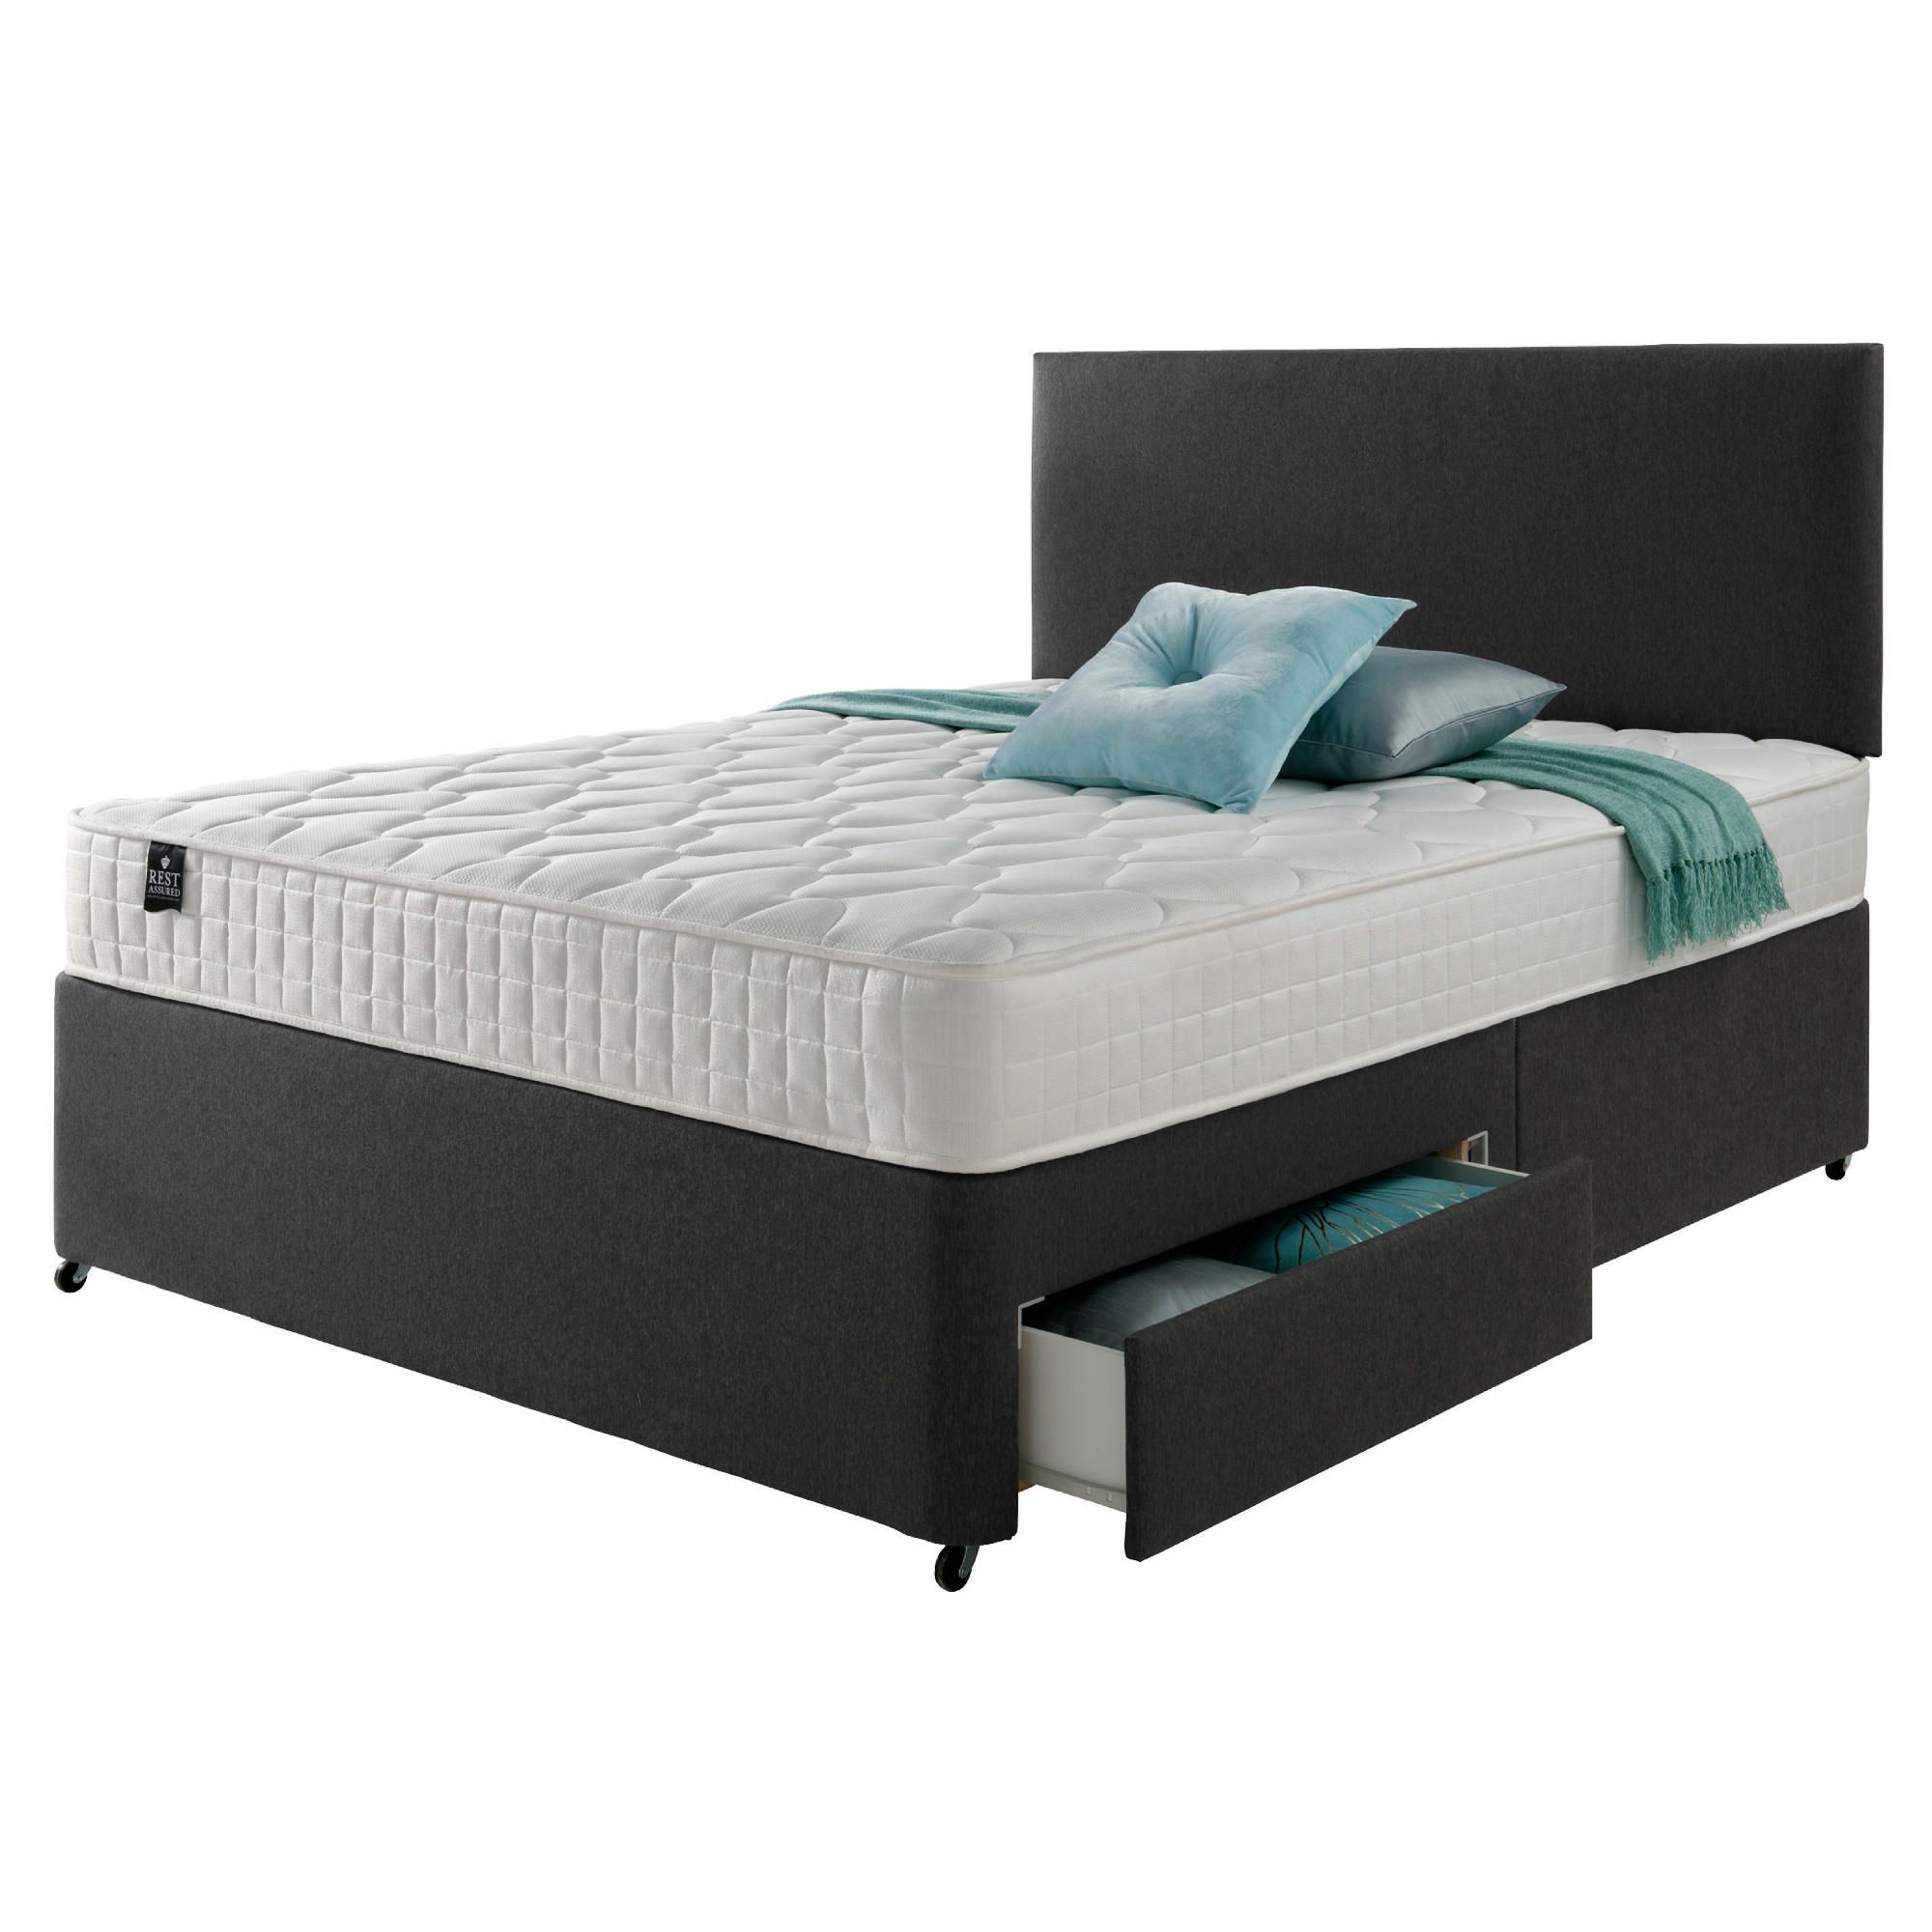 Rest Assured Classic 2 Drawer King Size Divan and Headboard Charcoal at Tesco Direct